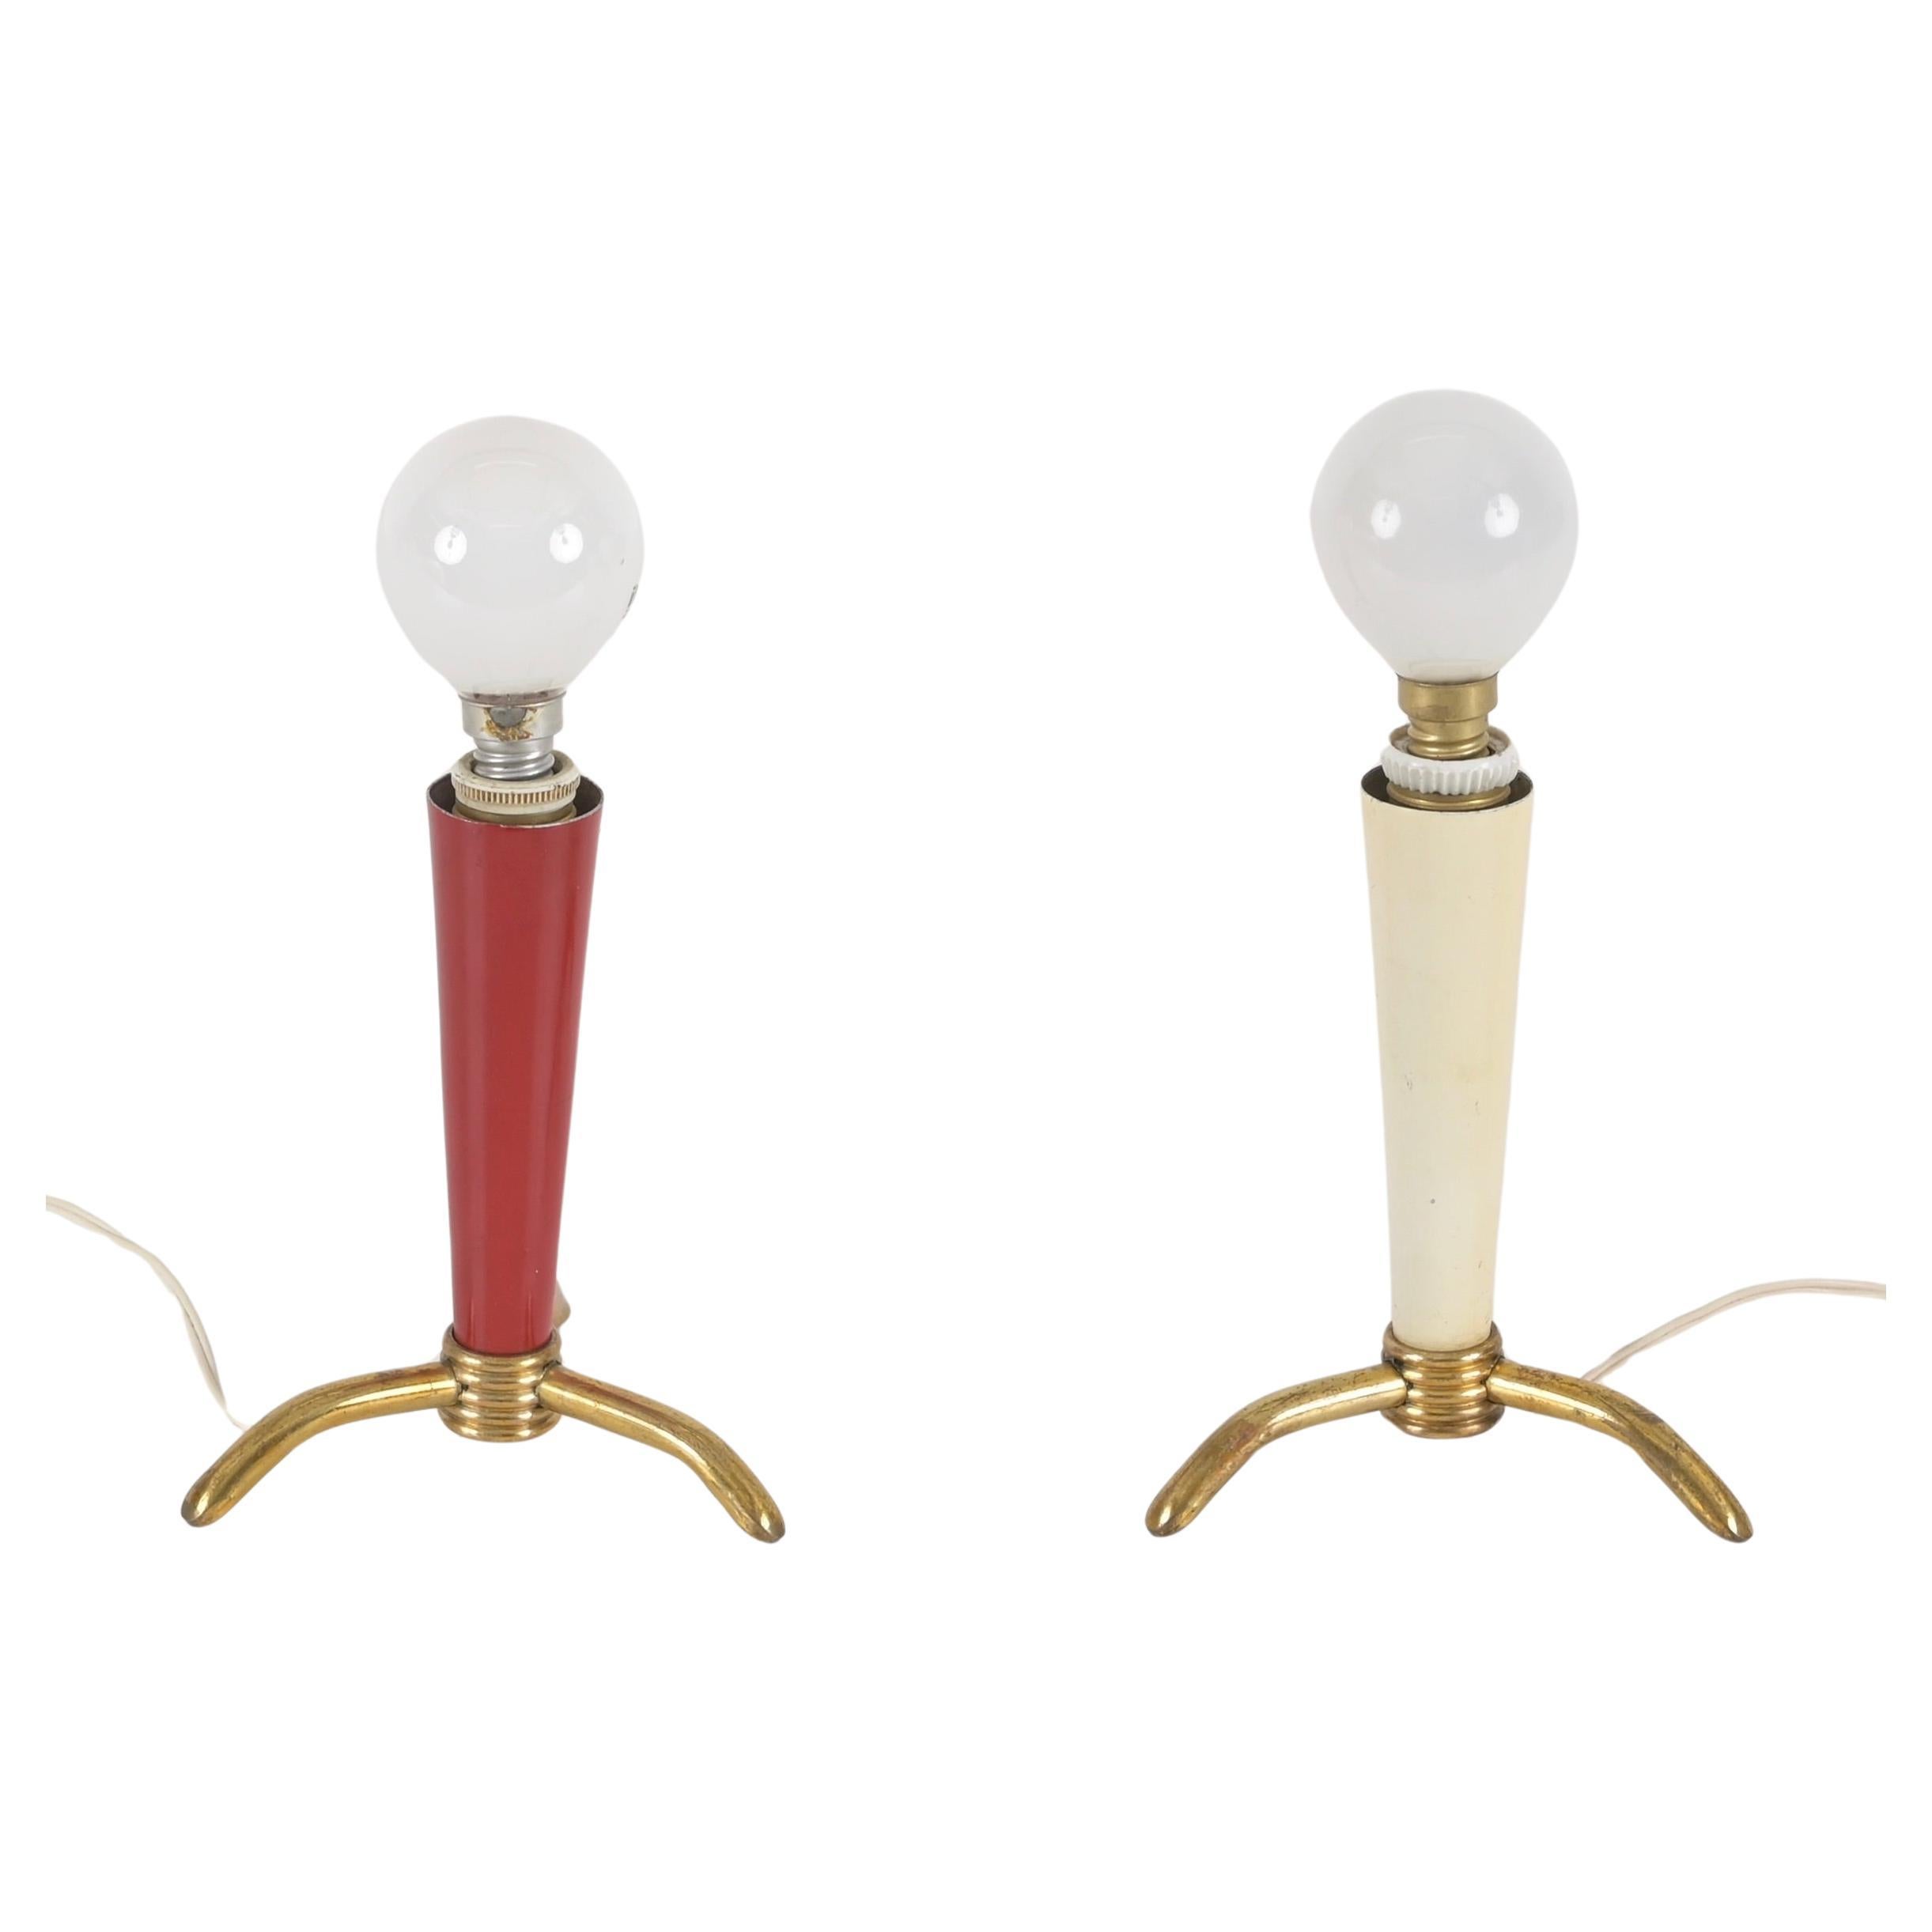 Pairs of Italian Table Lamps in Brass, Red and Ivory Metal, Stilnovo, 1950s